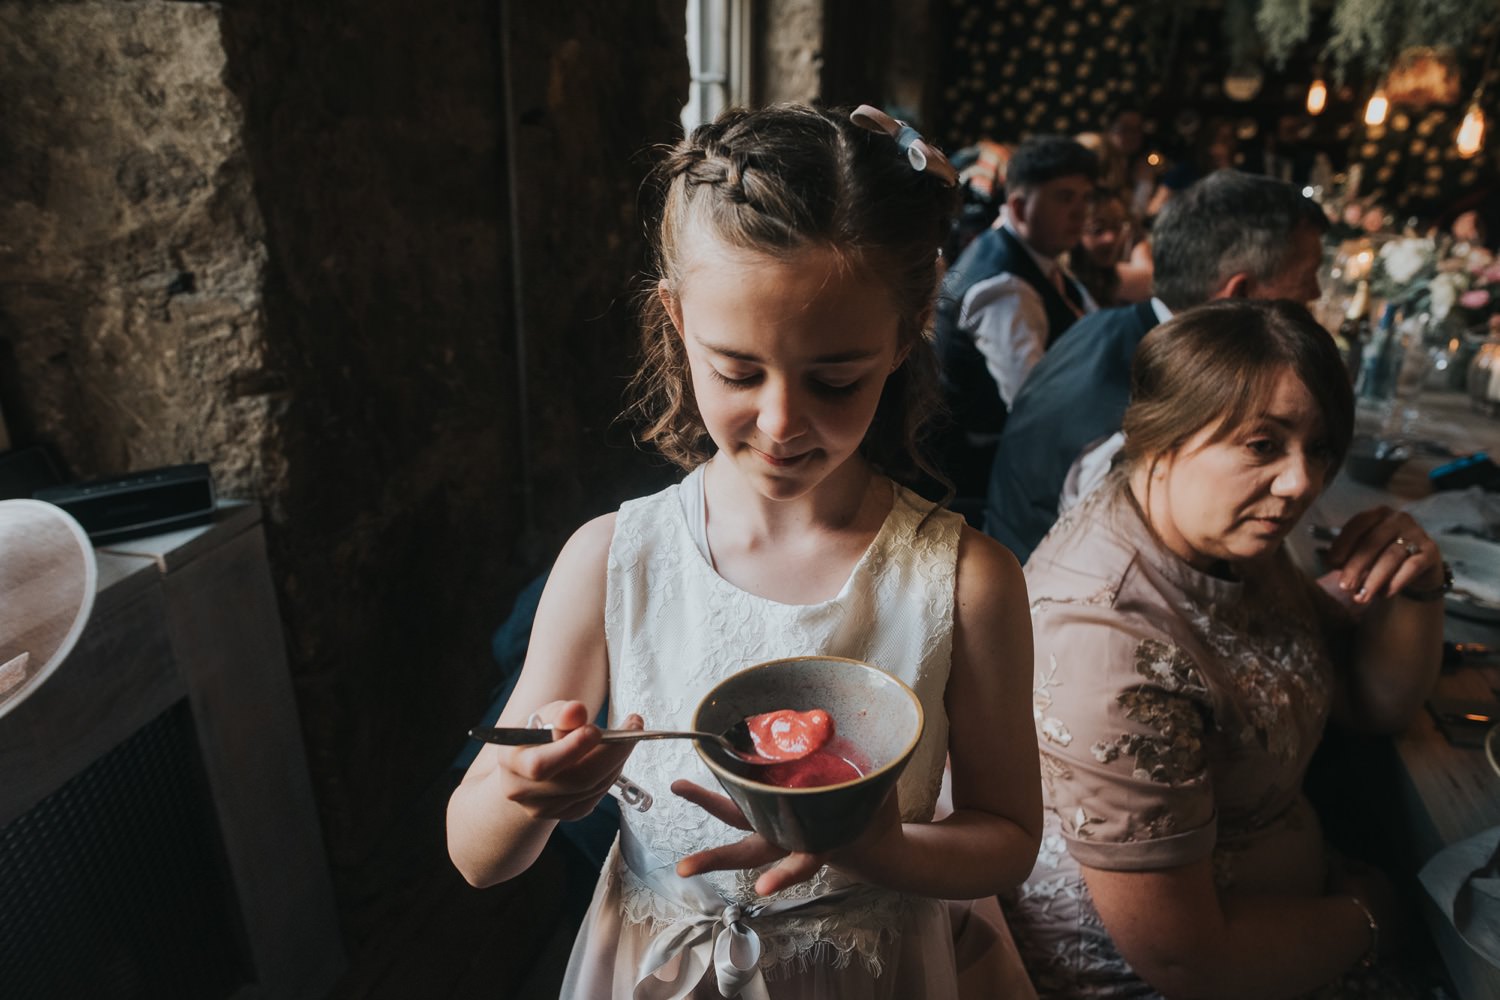 A young girl eats red sorbet from a bowl